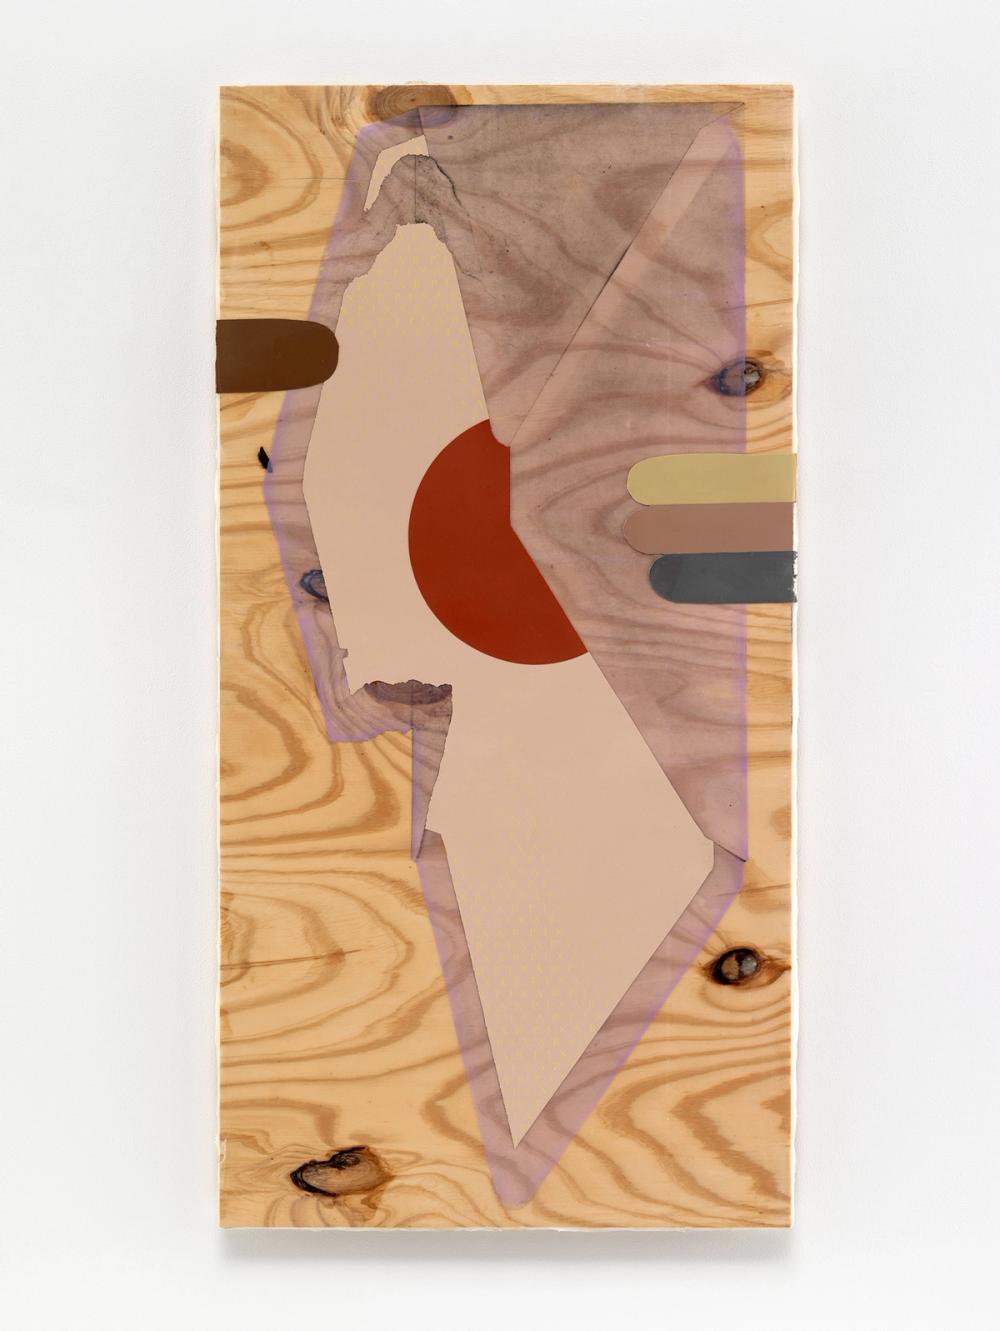 Seth Price, Design for Multiethnic Streetwear Envelope, 2015, Screen inks and pigmented acrylic polymer on wood, 47 x 27 inches. Courtesy of the artist and Petzel, New York.